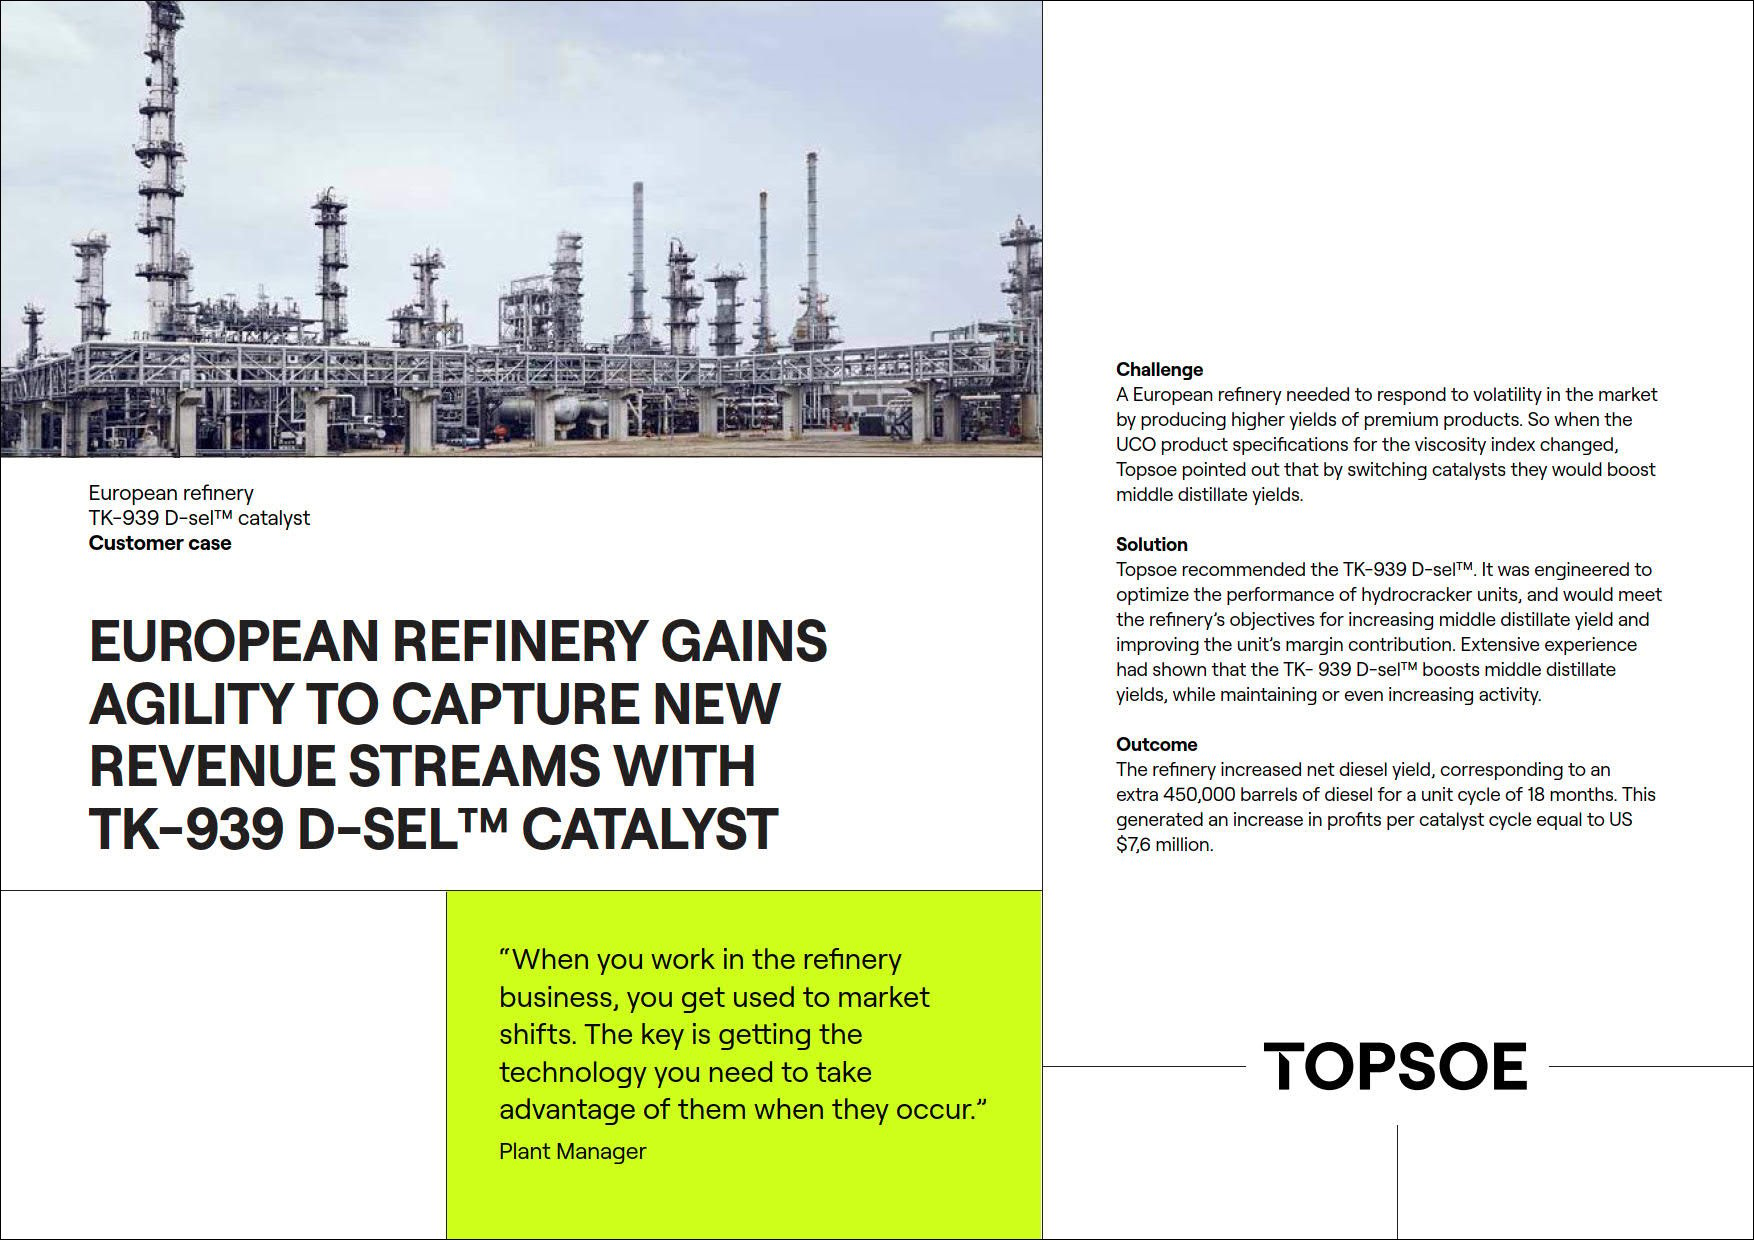 European Refinery Gains Agility to Capture New Revenue Streams with  TK-939 D-SEL™ Catalyst